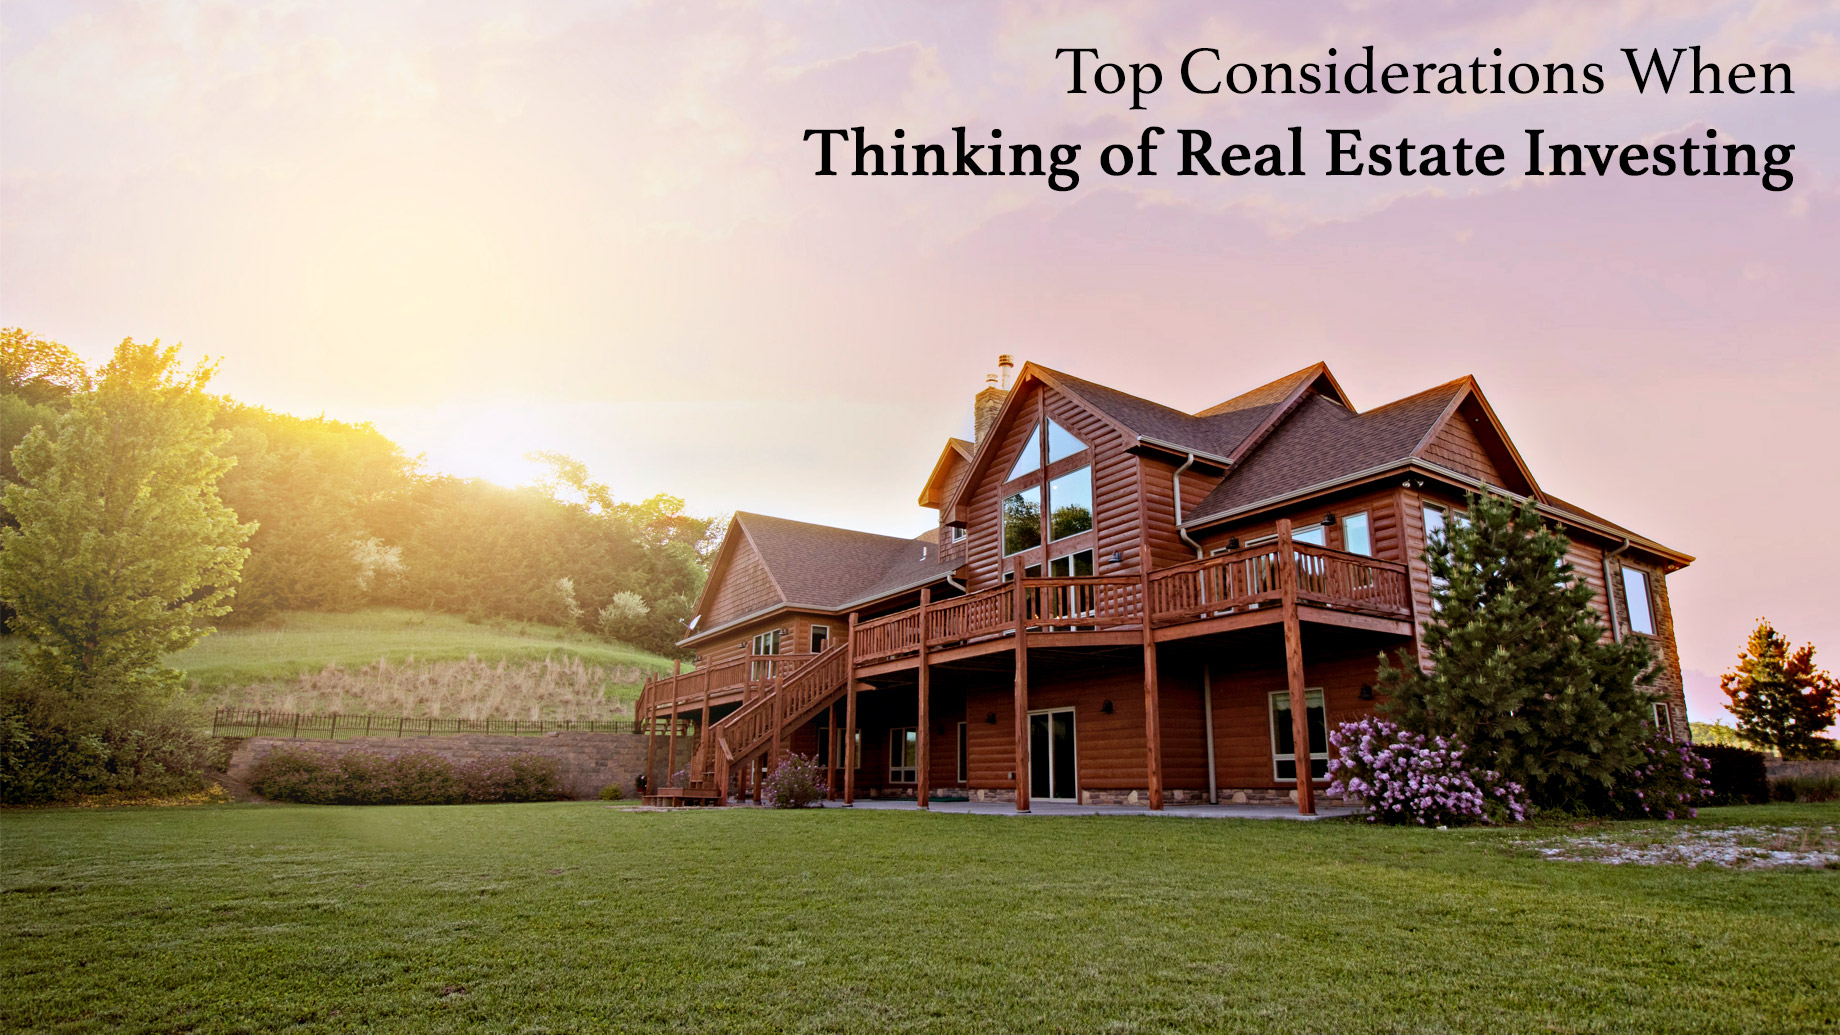 Top Considerations When Thinking of Real Estate Investing